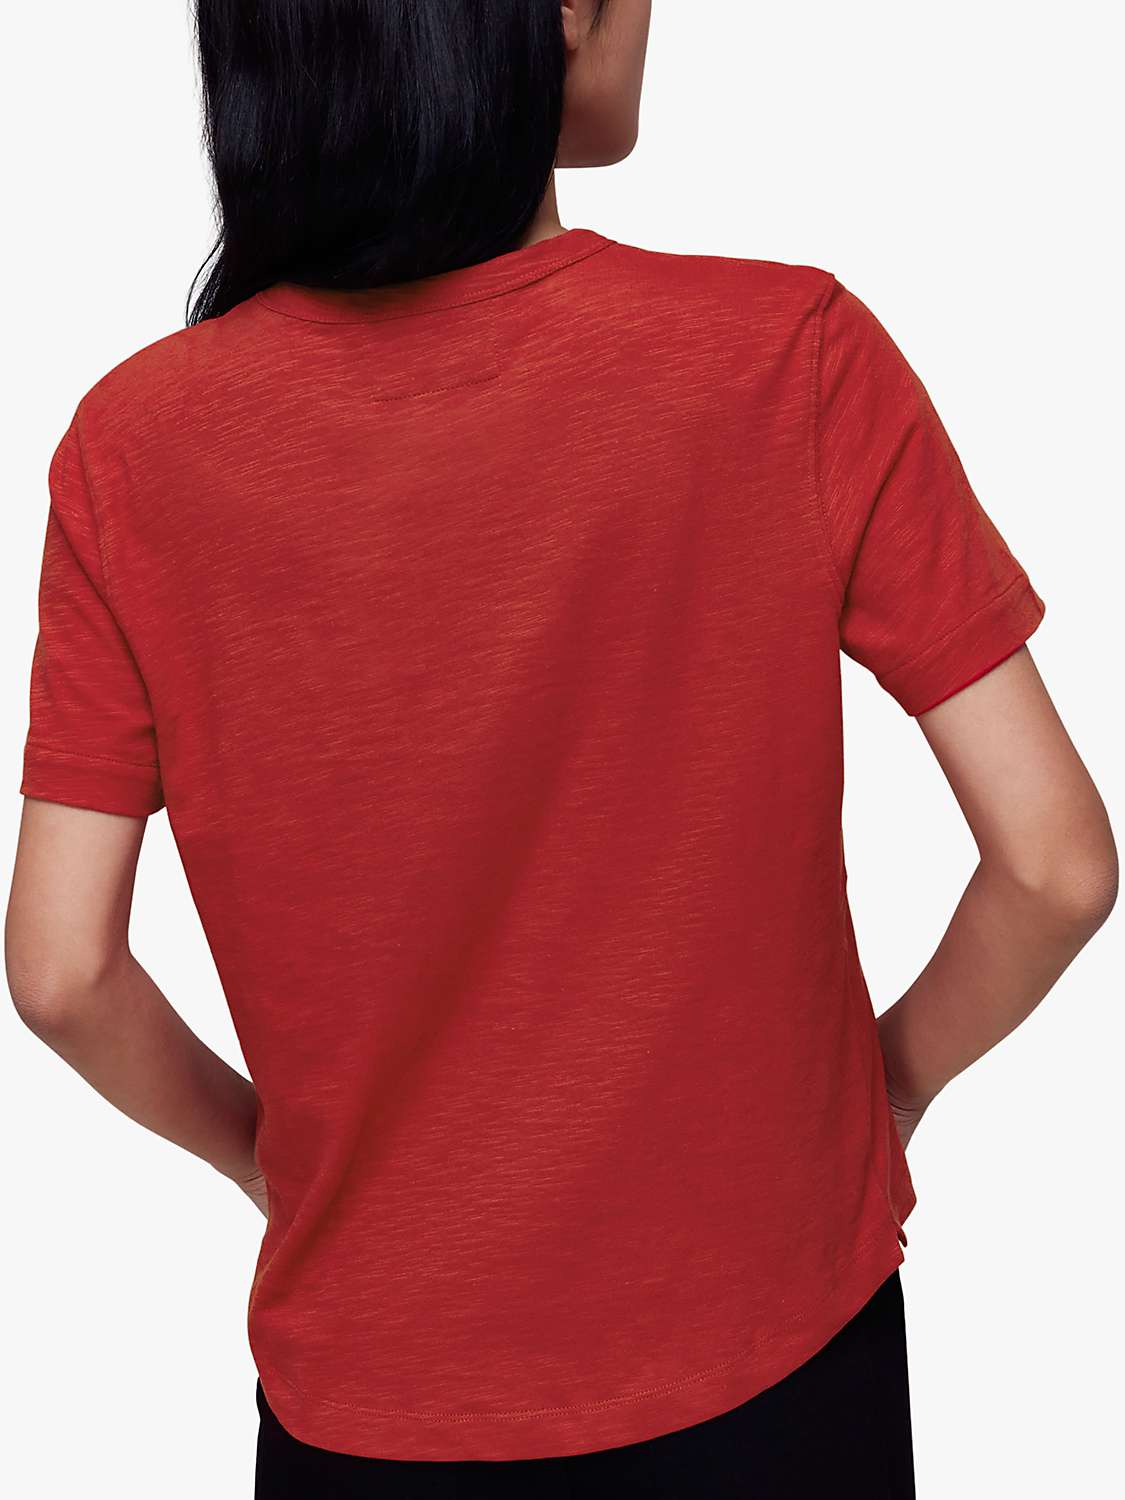 Buy Whistles Emily Ultimate T-Shirt Online at johnlewis.com